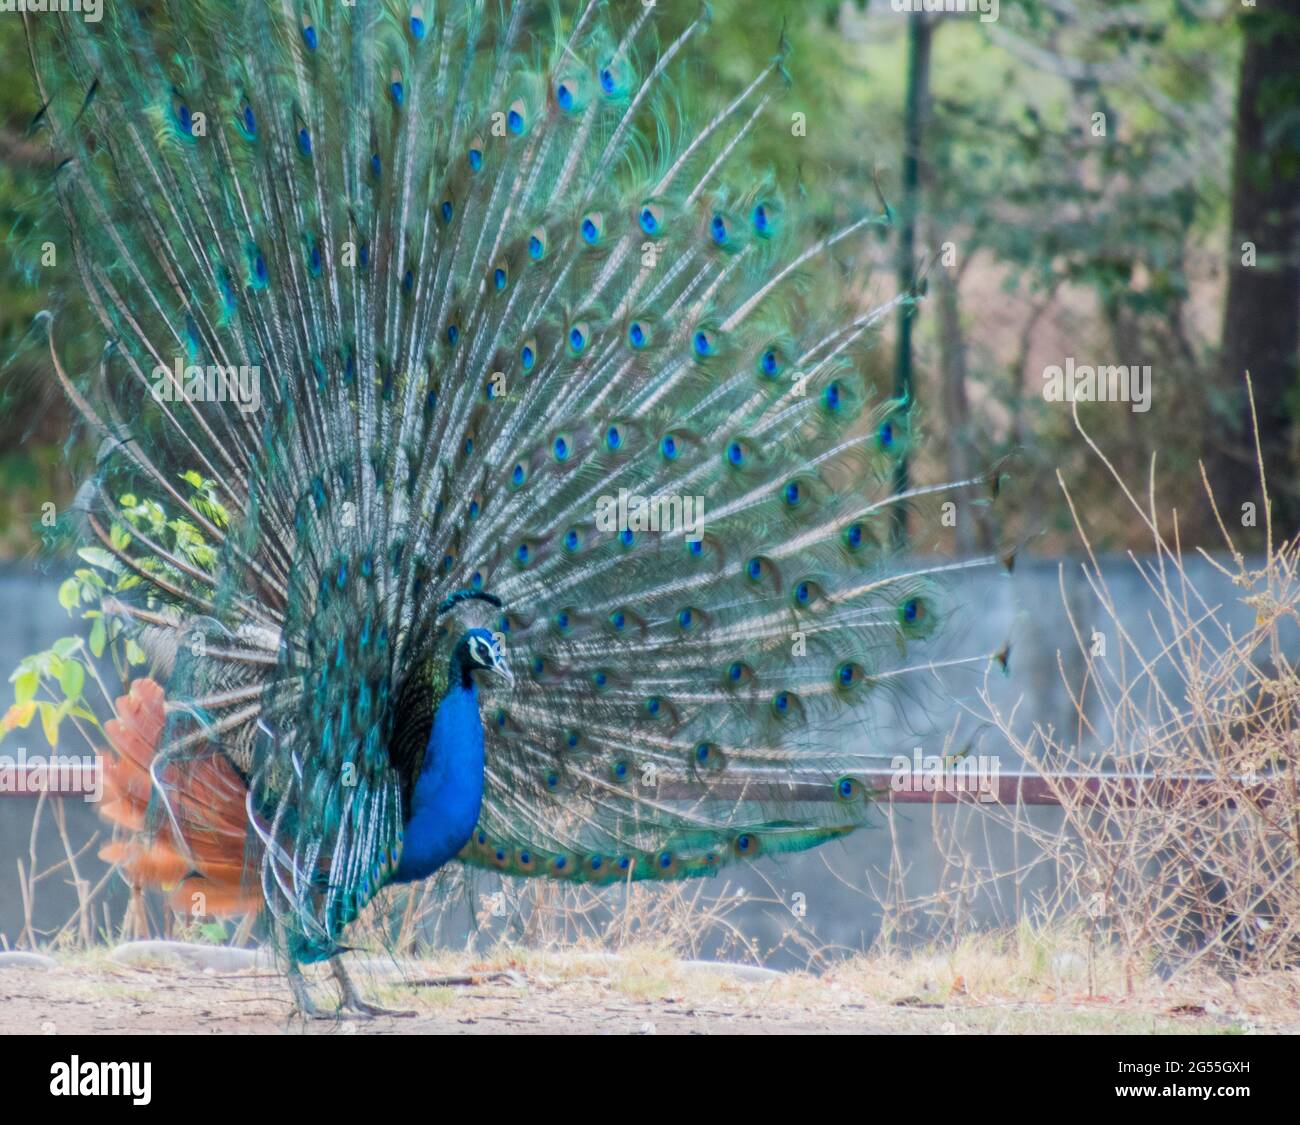 Indian Peacock from the back Stock Photo